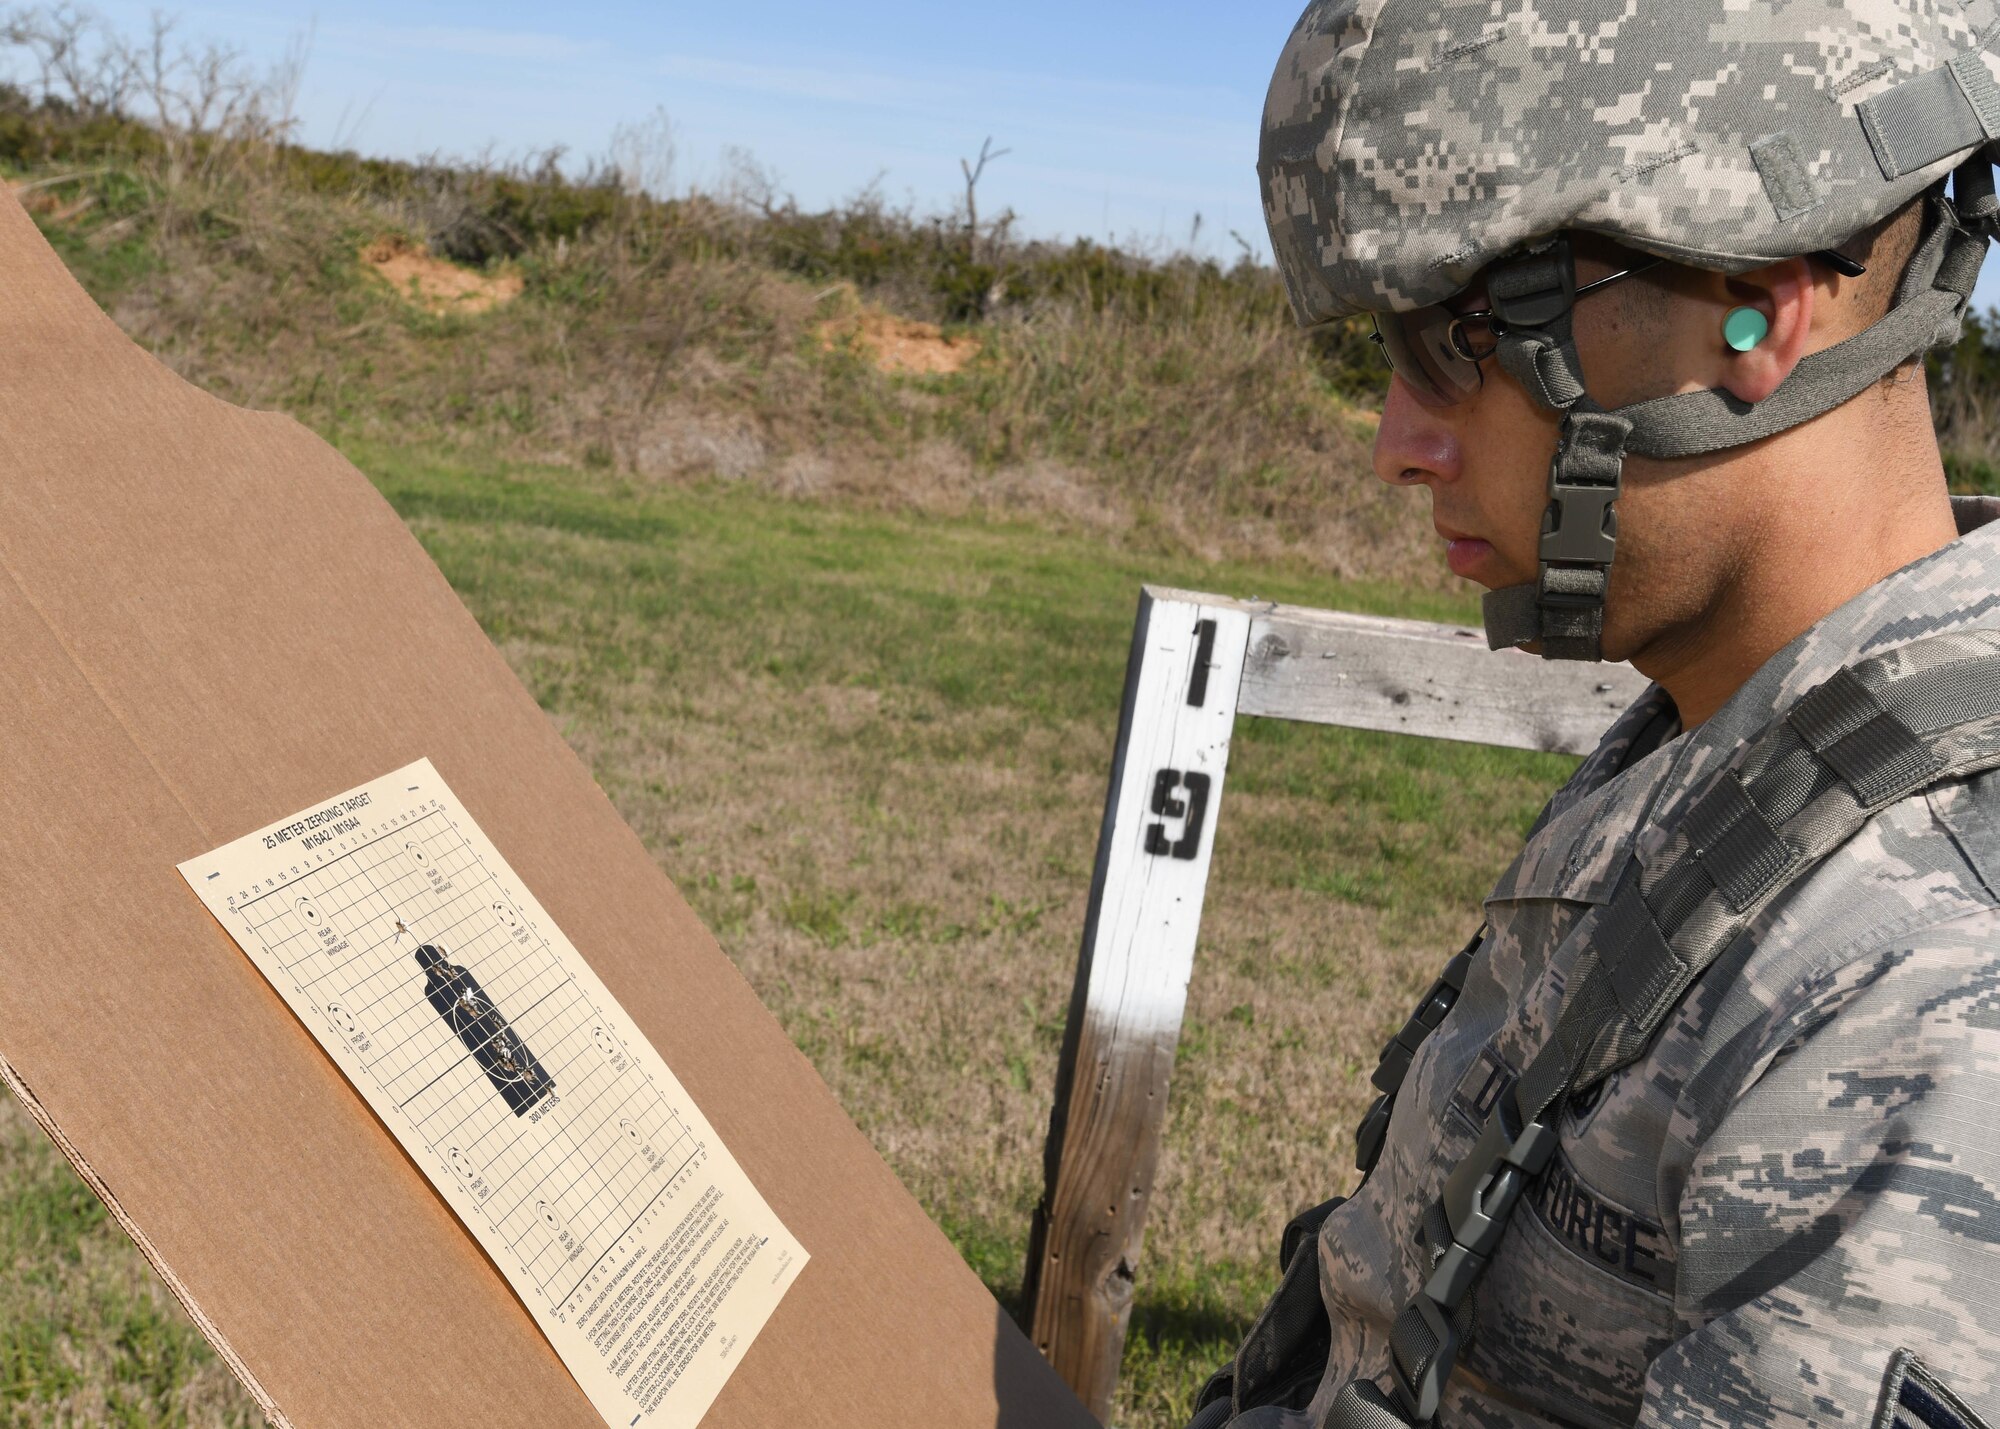 U.S. Air Force Senior Airman Orlando Duarte, an aerospace propulsion mechanic with the 149th Fighter Wing, Texas Air National Guard, headquartered at Joint Base San Antonio-Lackland, Texas, inspects his M4 carbine shot grouping during the Texas Military Department’s Best Warrior Competition March 2, 2017 at Camp Swift, Bastrop, Texas. During the BWC competitors had the opportunity to zero their weapons before moving on to the M4 qualification course. (Air National Guard photo by Senior Airman De’Jon Williams)